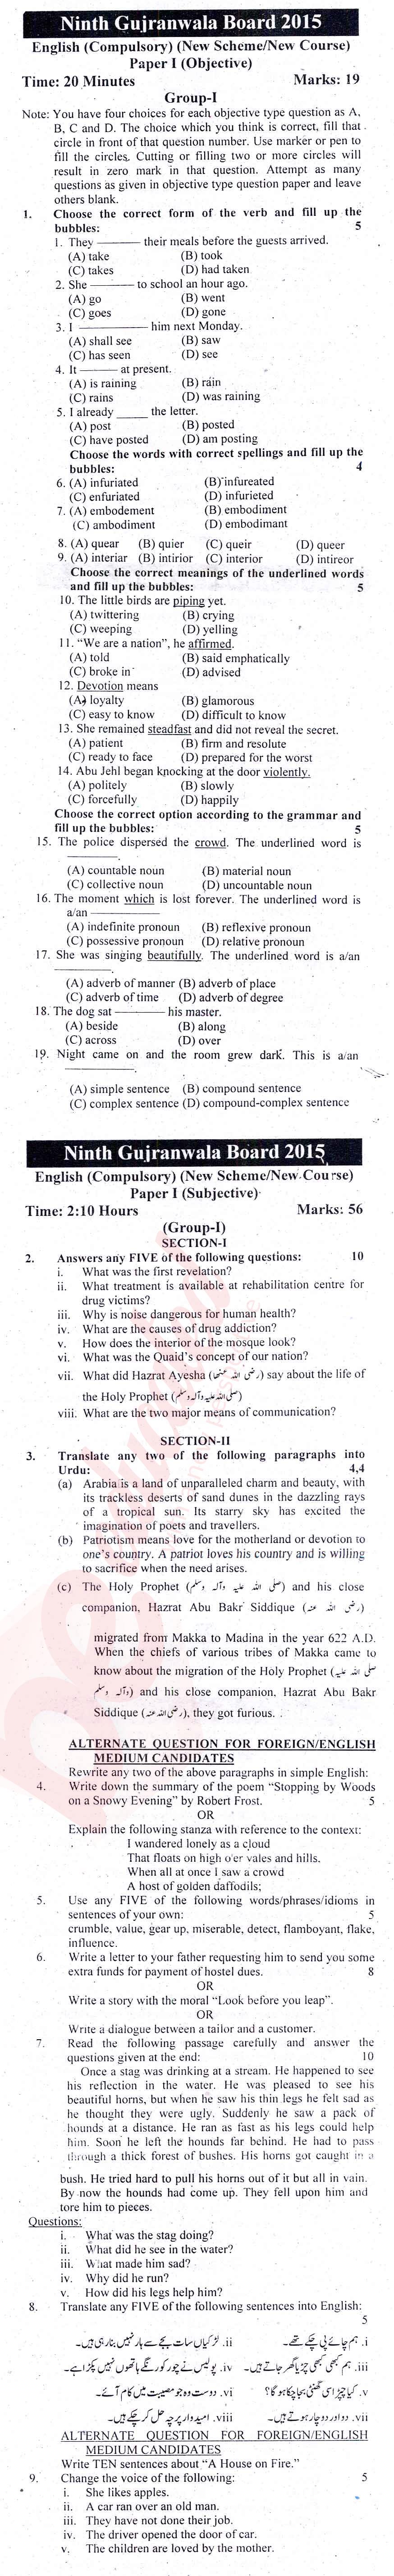 English 9th class Past Paper Group 1 BISE Gujranwala 2015